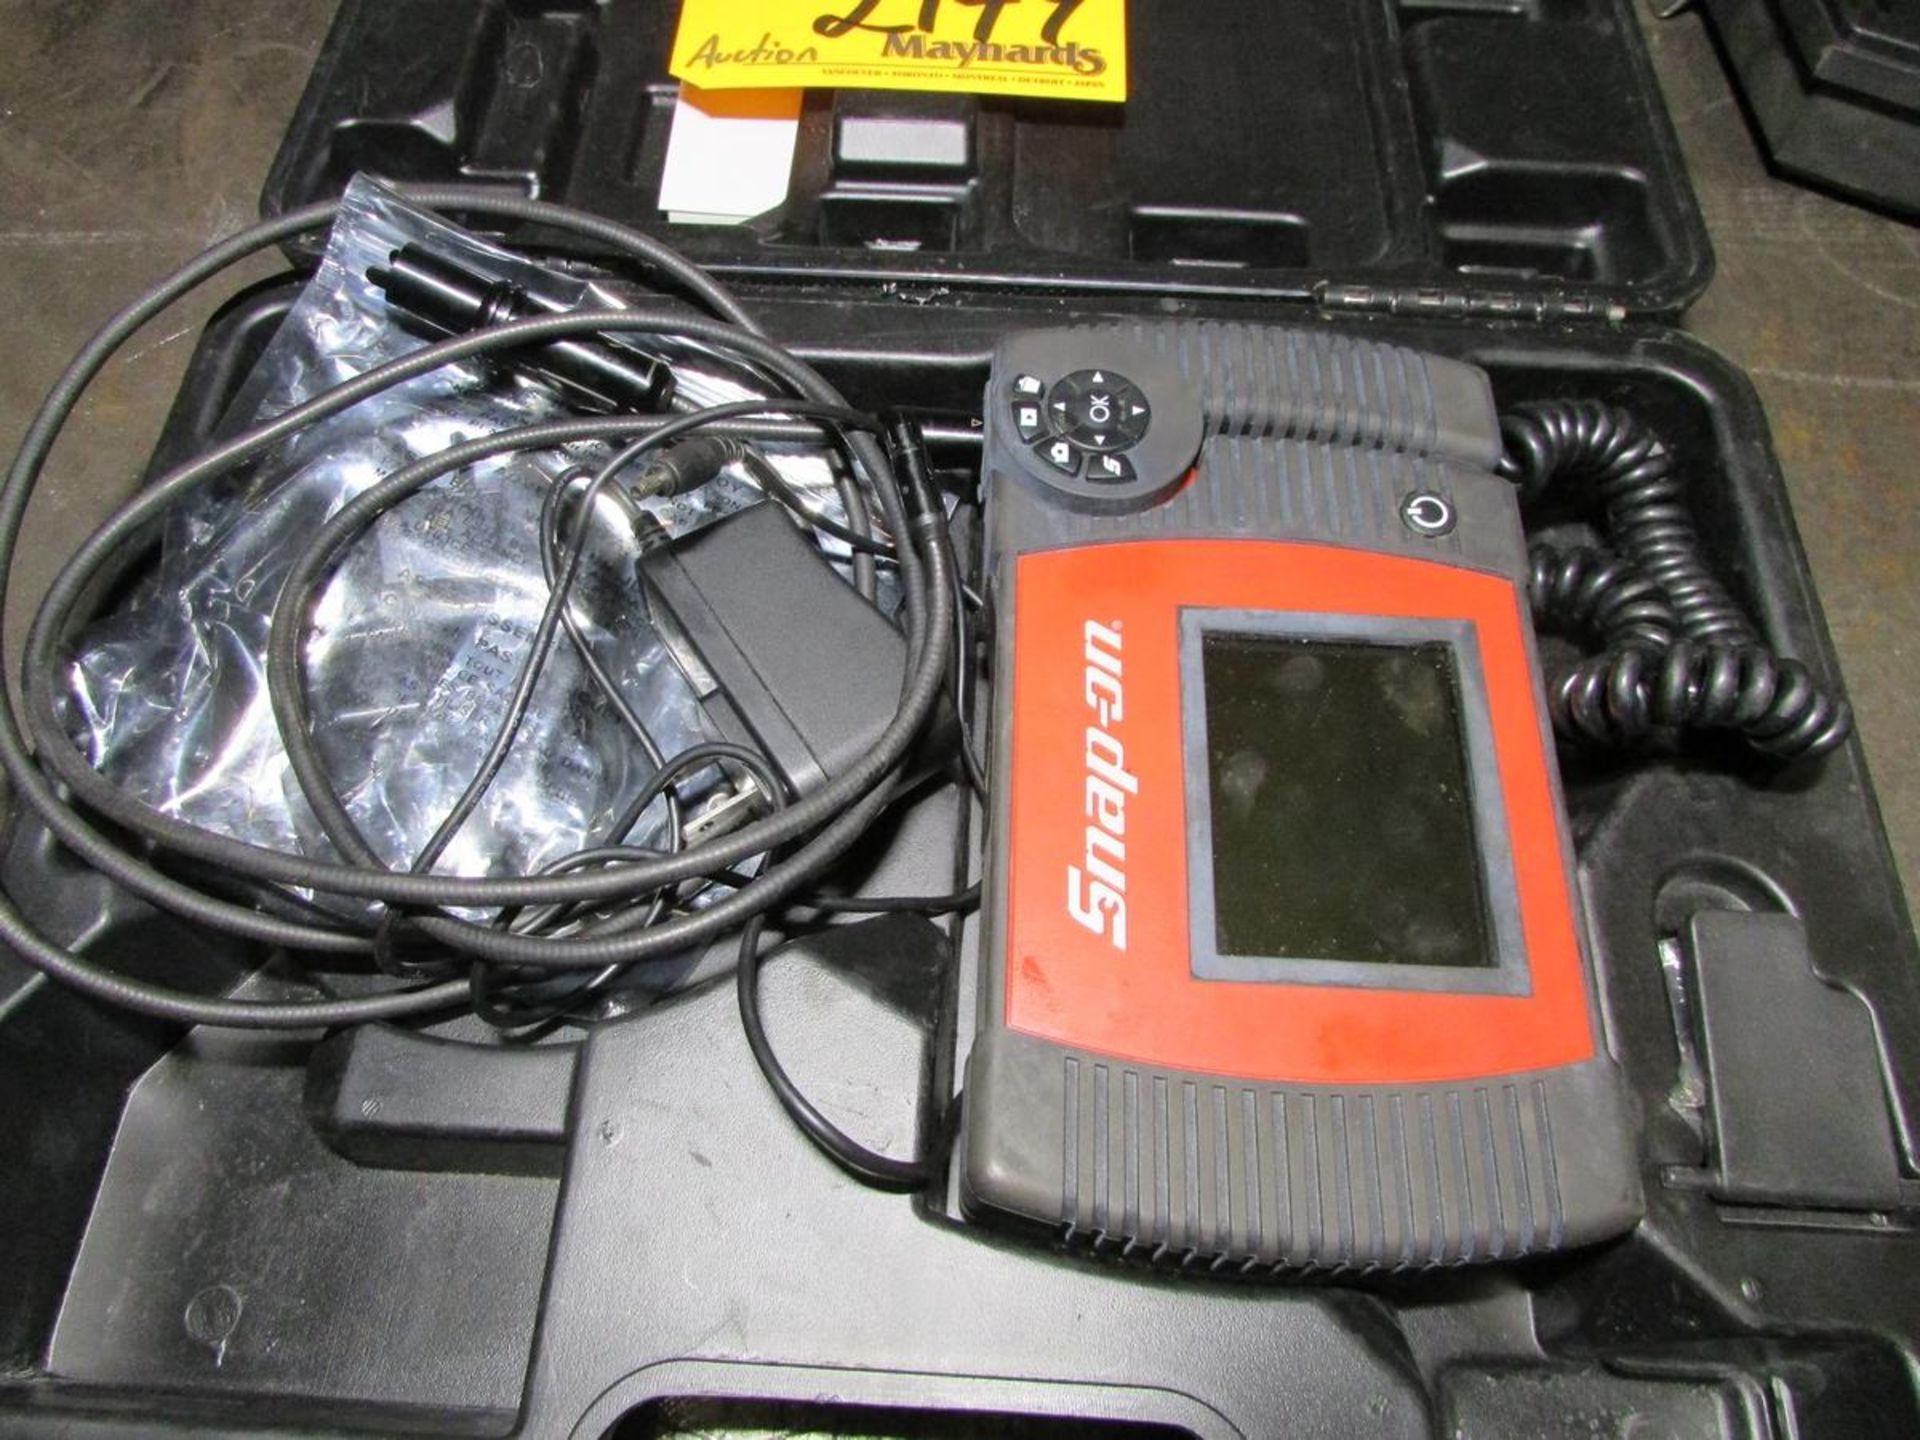 Snap-On Borescope - Image 2 of 3